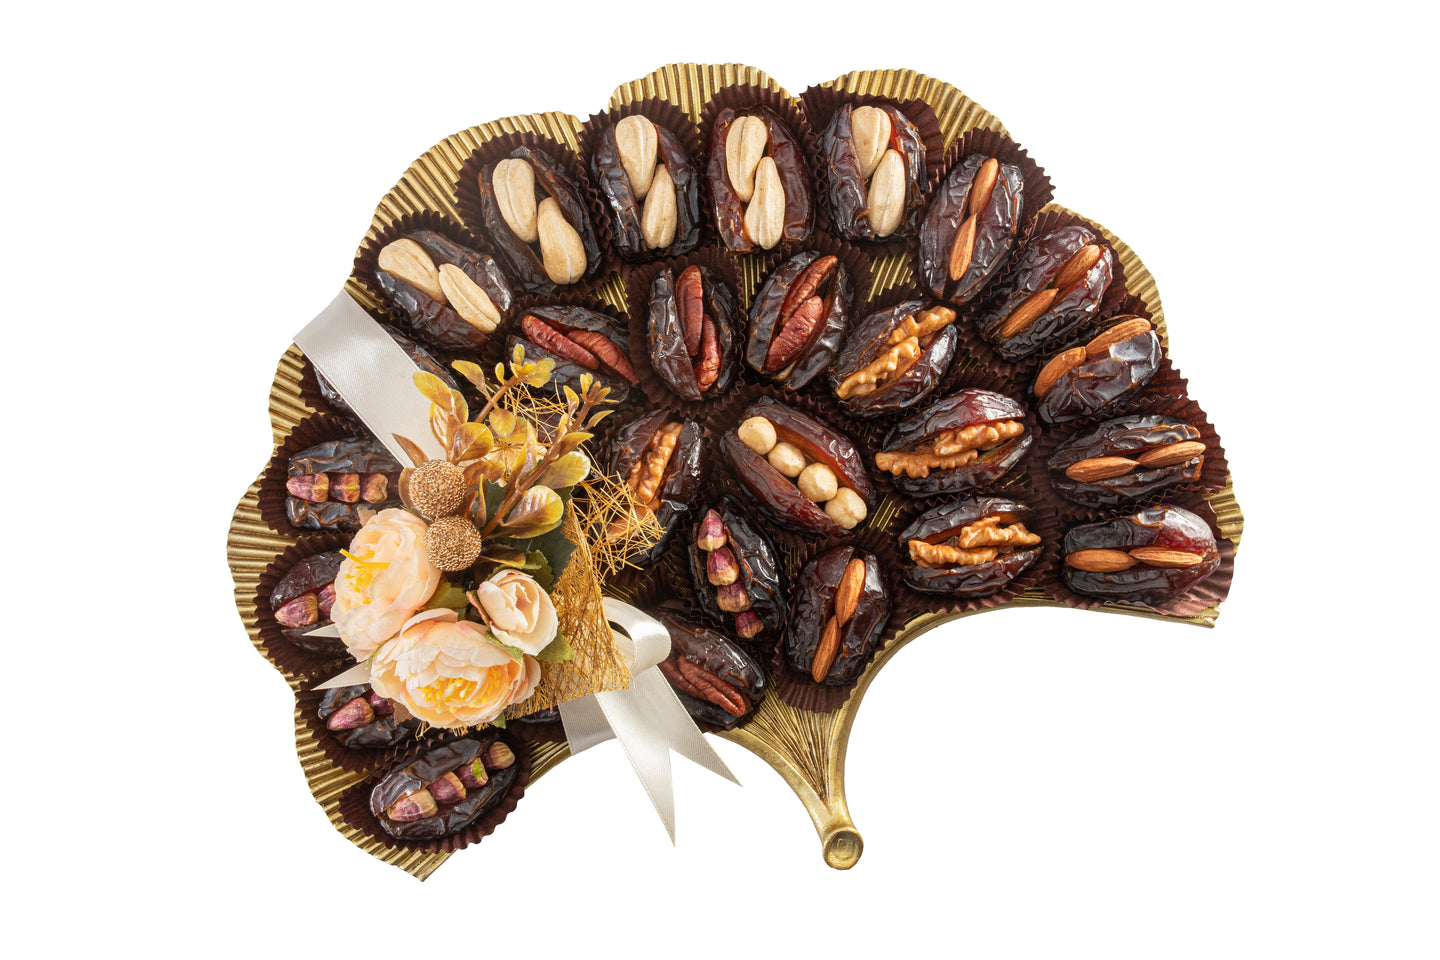 The Best Dates (Khajur) and Dry Fruit Combinations for You!